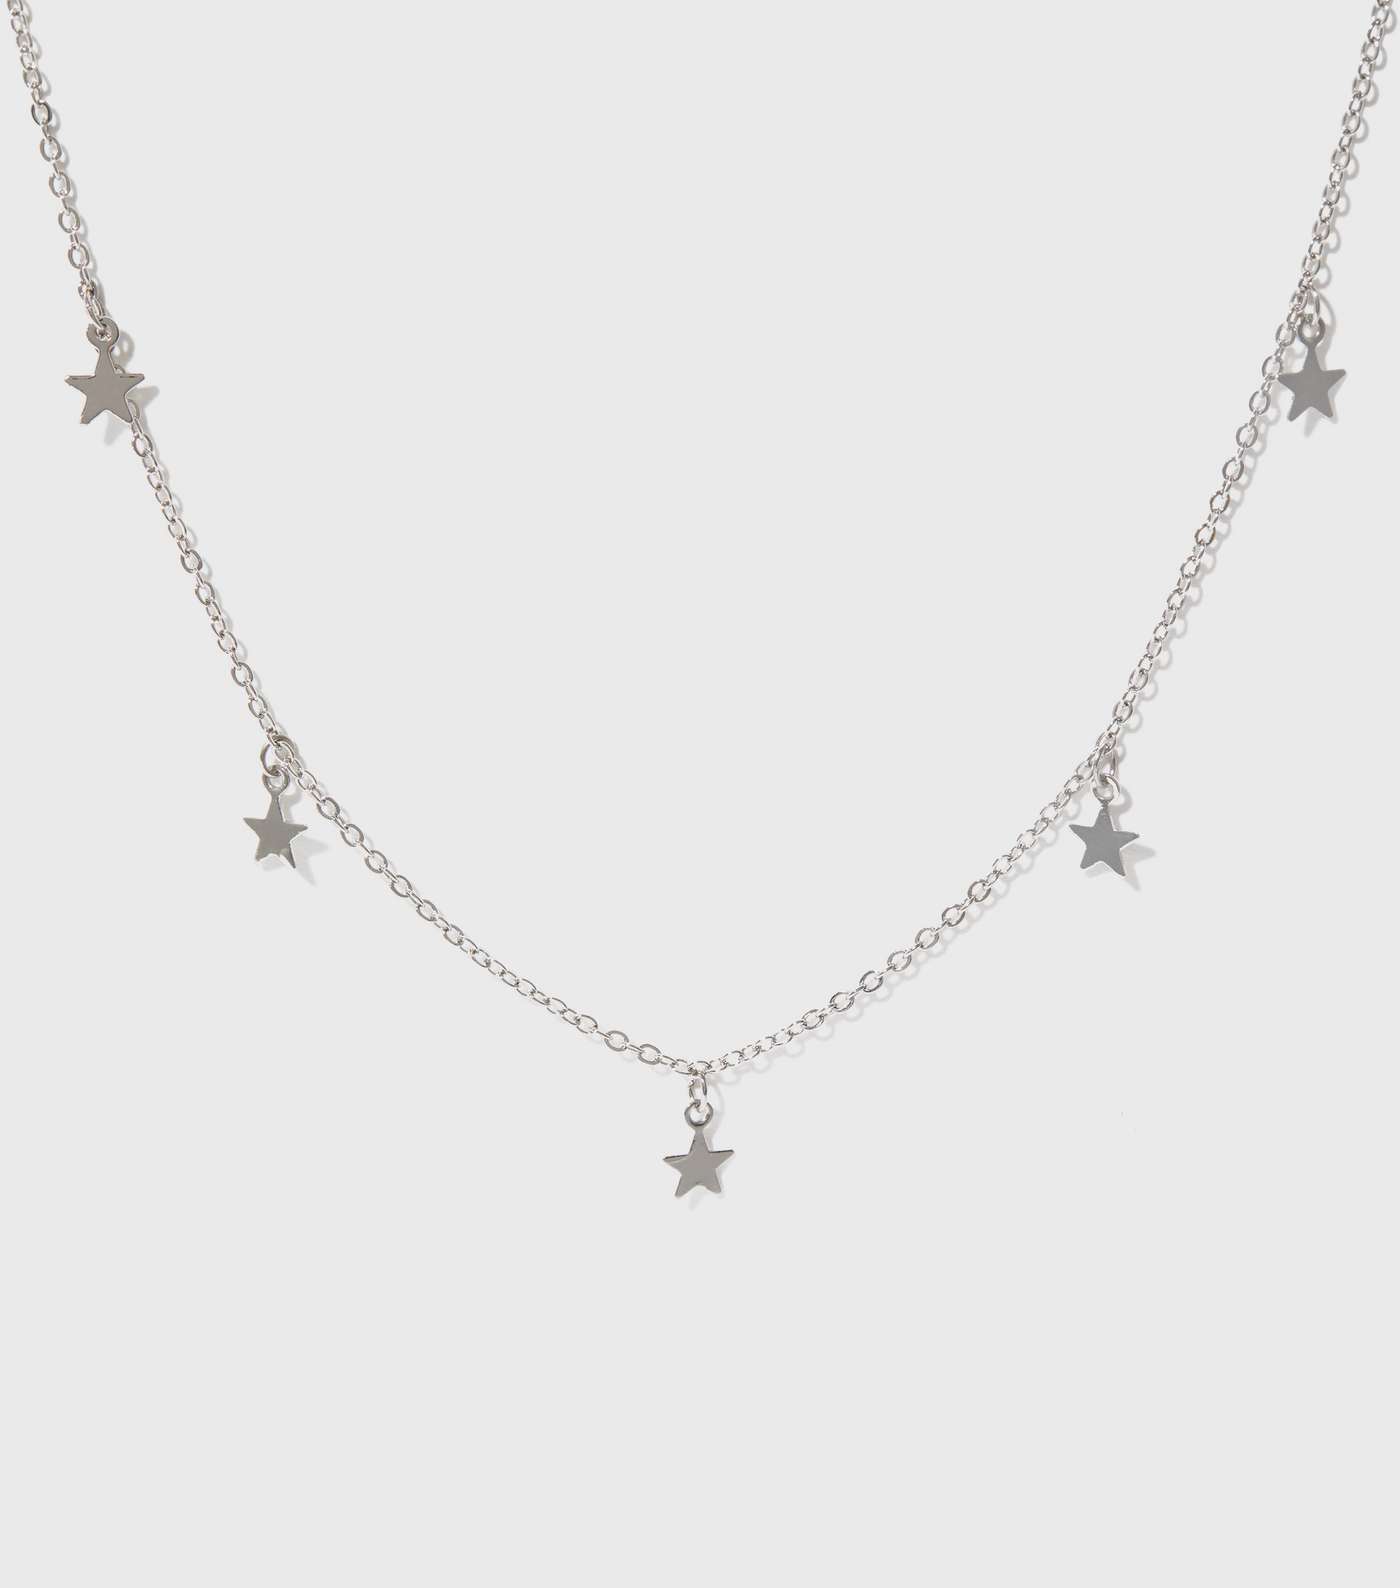 Silver Star Good Friends Anklet Image 2